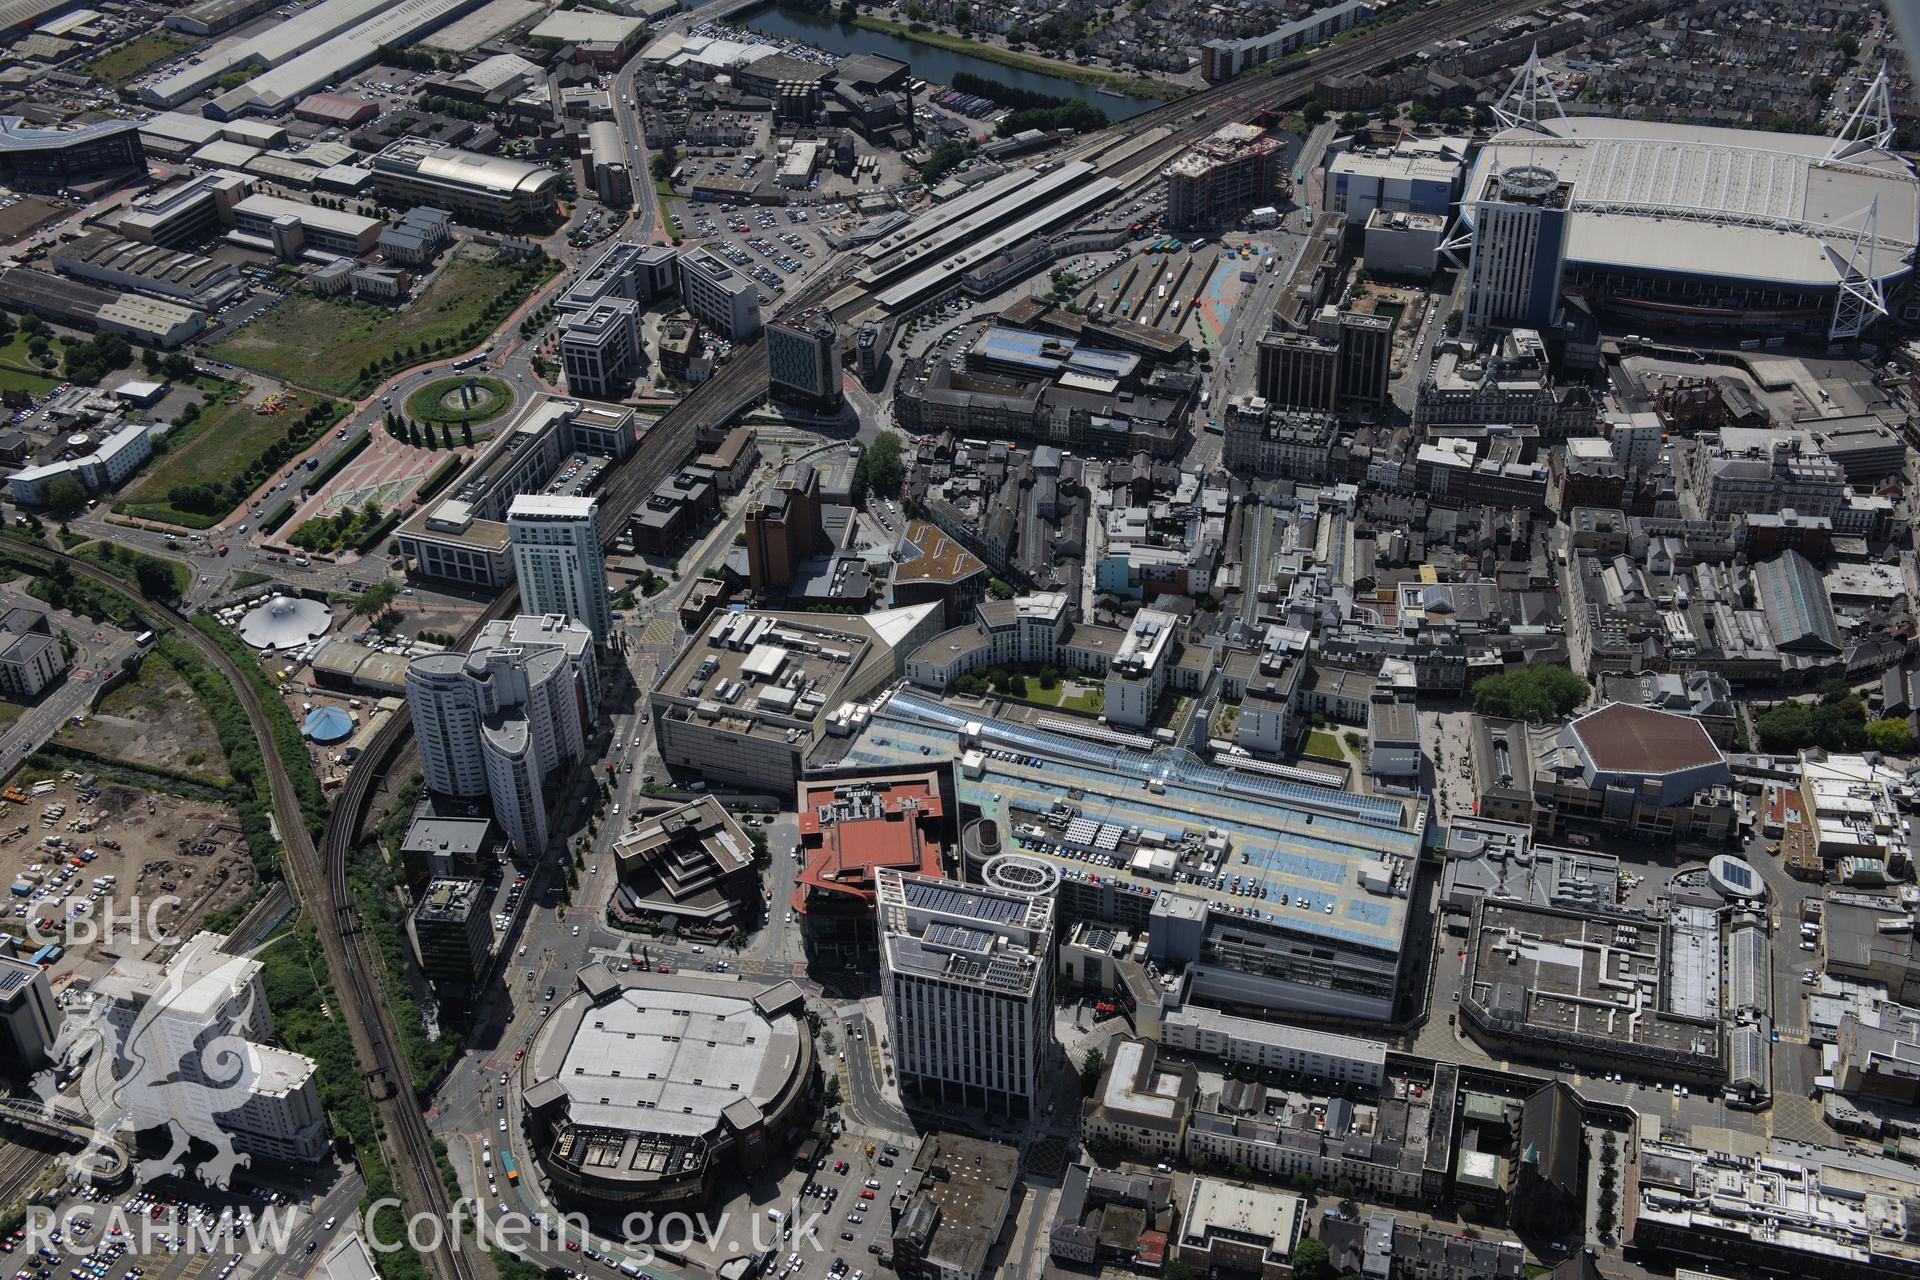 Millennium Stadium; St. David's shopping centre, Cardiff International Arena and Central Railway Station, Cardiff. Oblique aerial photograph taken during the Royal Commission's programme of archaeological aerial reconnaissance by Toby Driver on 29/06/2015.